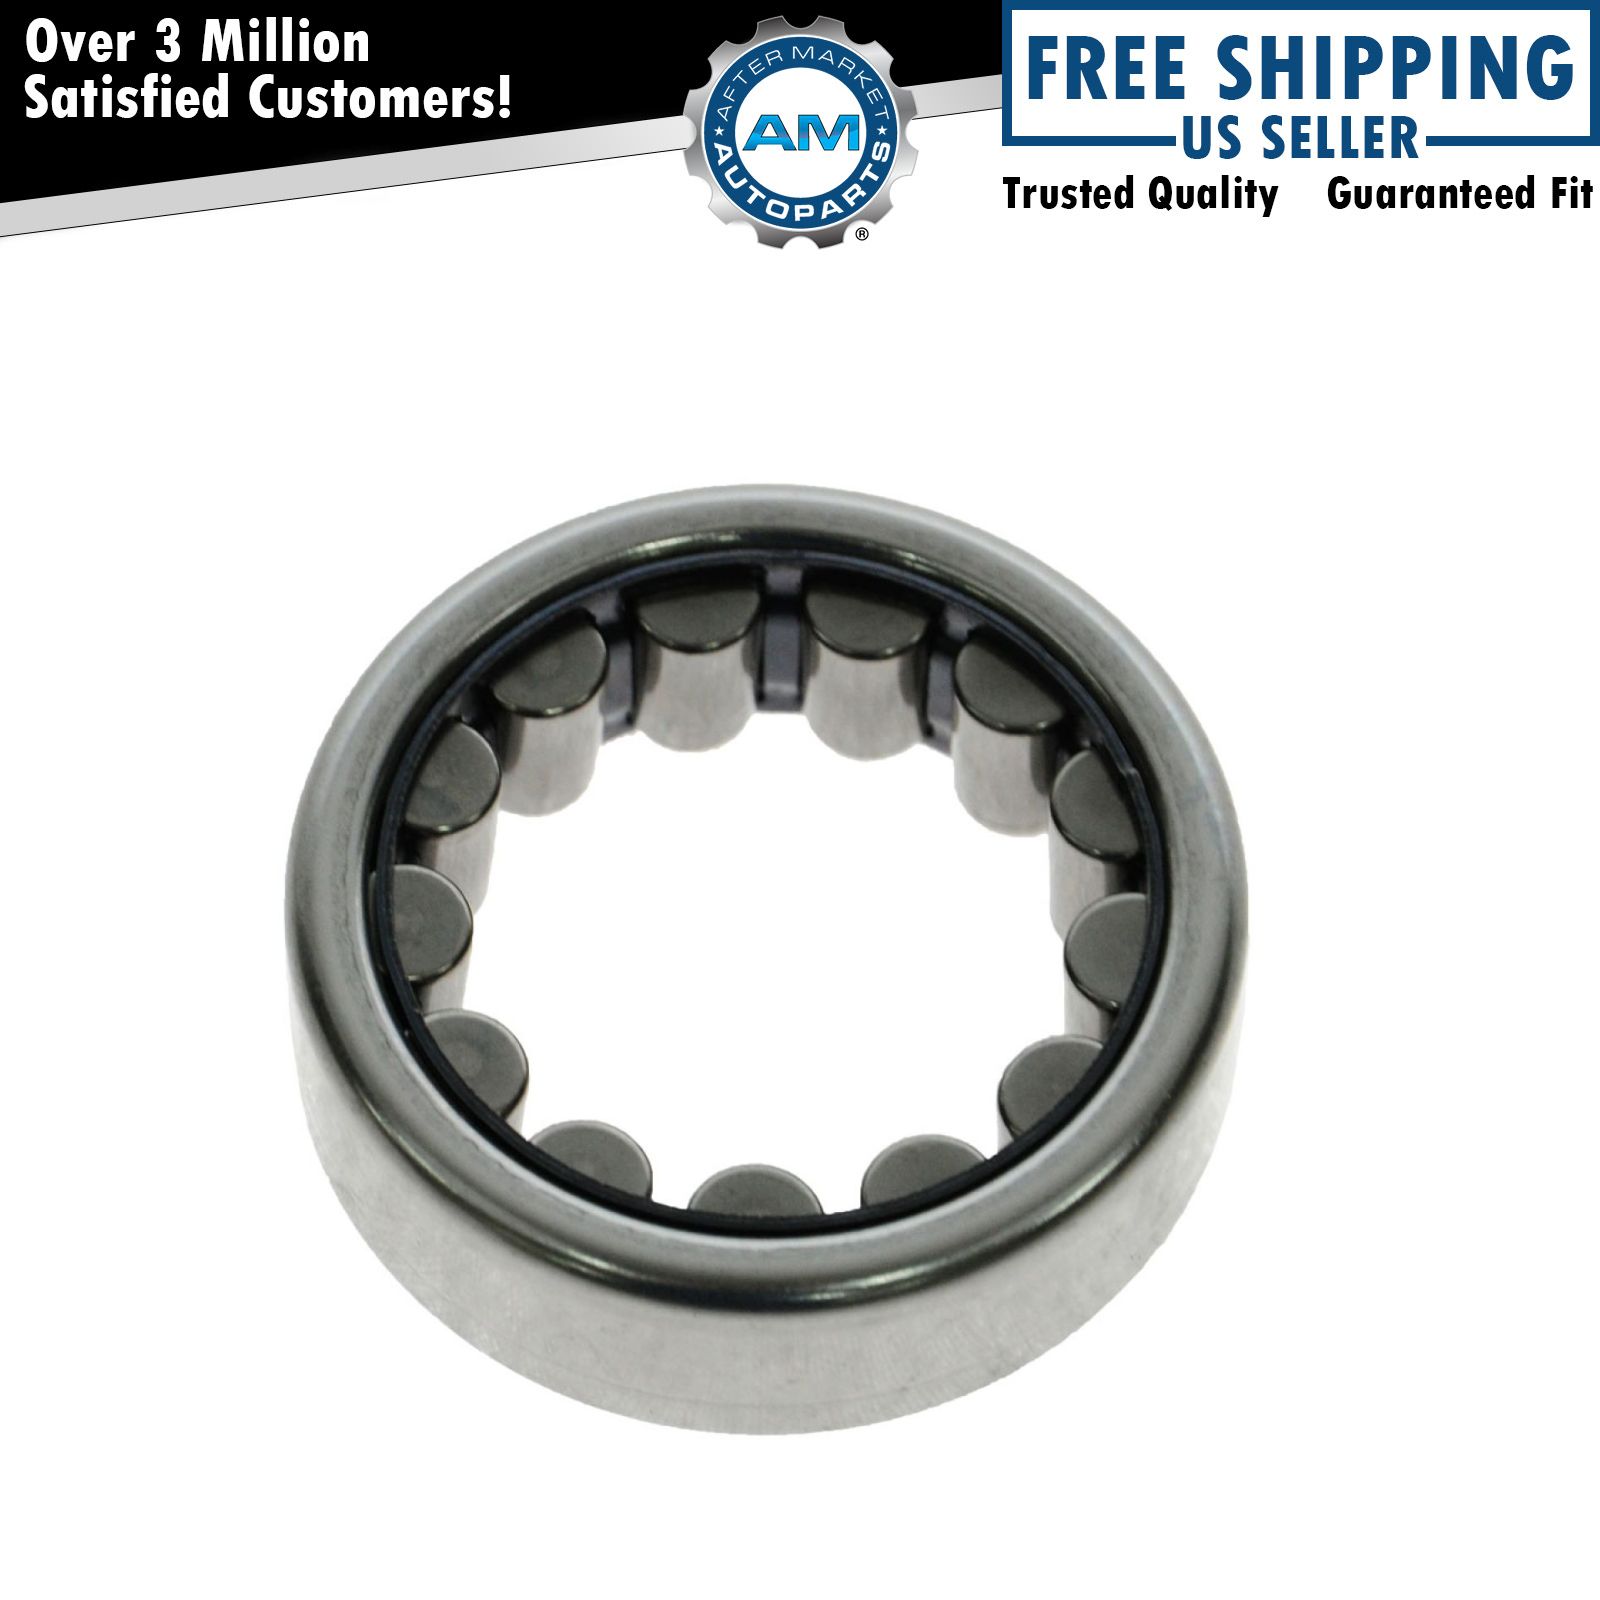 TIMKEN Axle Shaft Wheel Bearing Rear for GM Dodge Ford Jeep with 8.75 Ring Gear